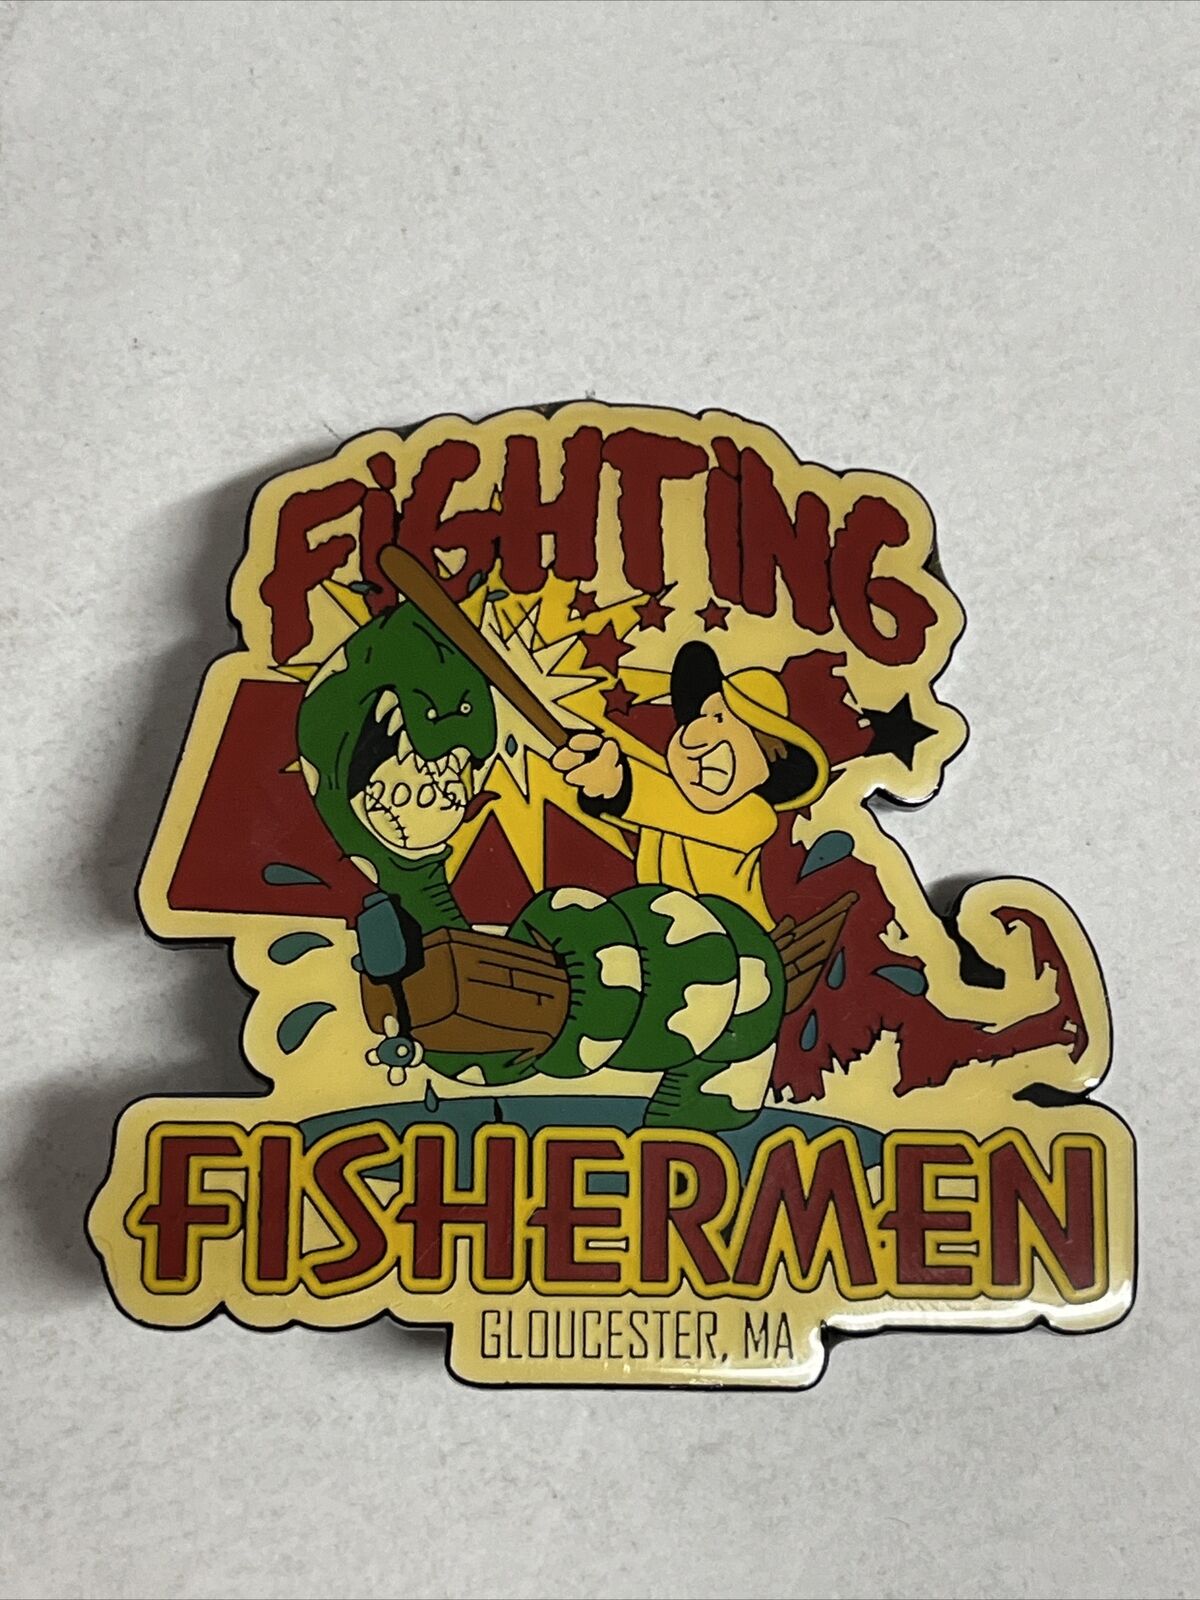 Cooperstown Dreams Park Pin 2005 Fighting Fisherman Gloucester, MA Baseball